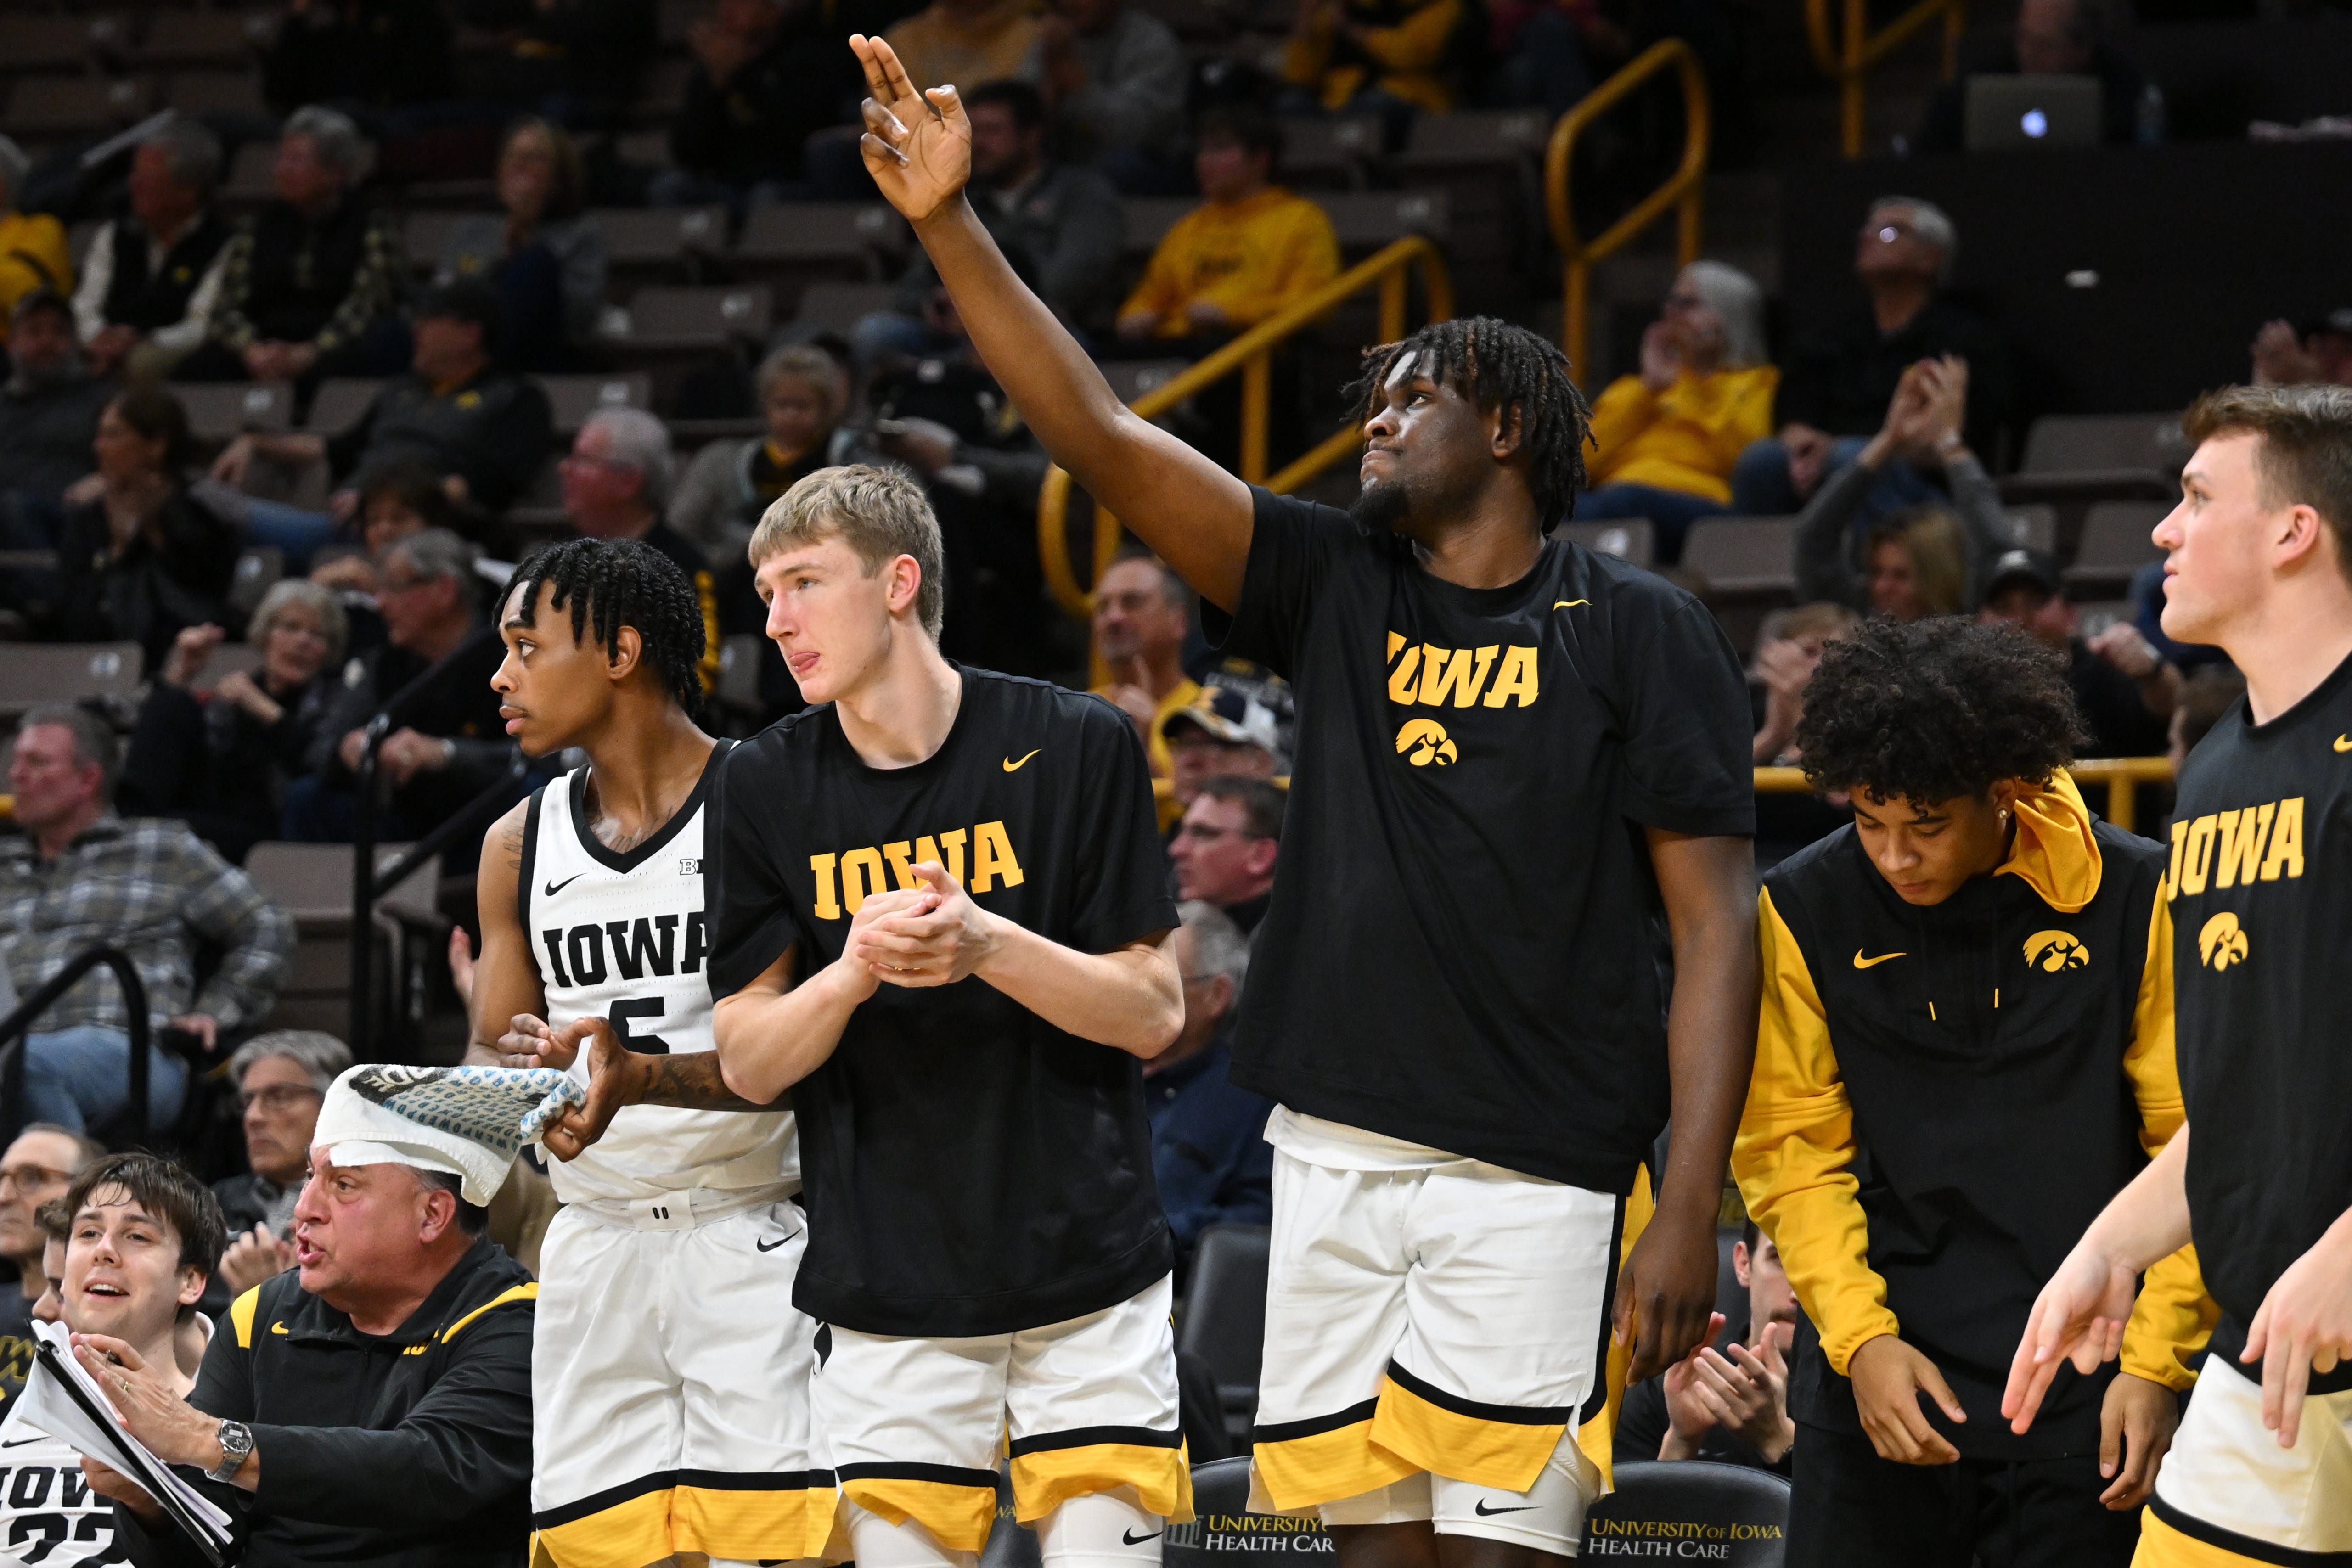 Iowa Hawkeyes players, from left, Dasonte Bowen, Josh Dix, Josh Ogundele and Amarion Nimmers react during the second half of an NCAA college basketball game against Georgia Tech, Tuesday, Nov. 29, 2022, in Iowa City, Iowa.